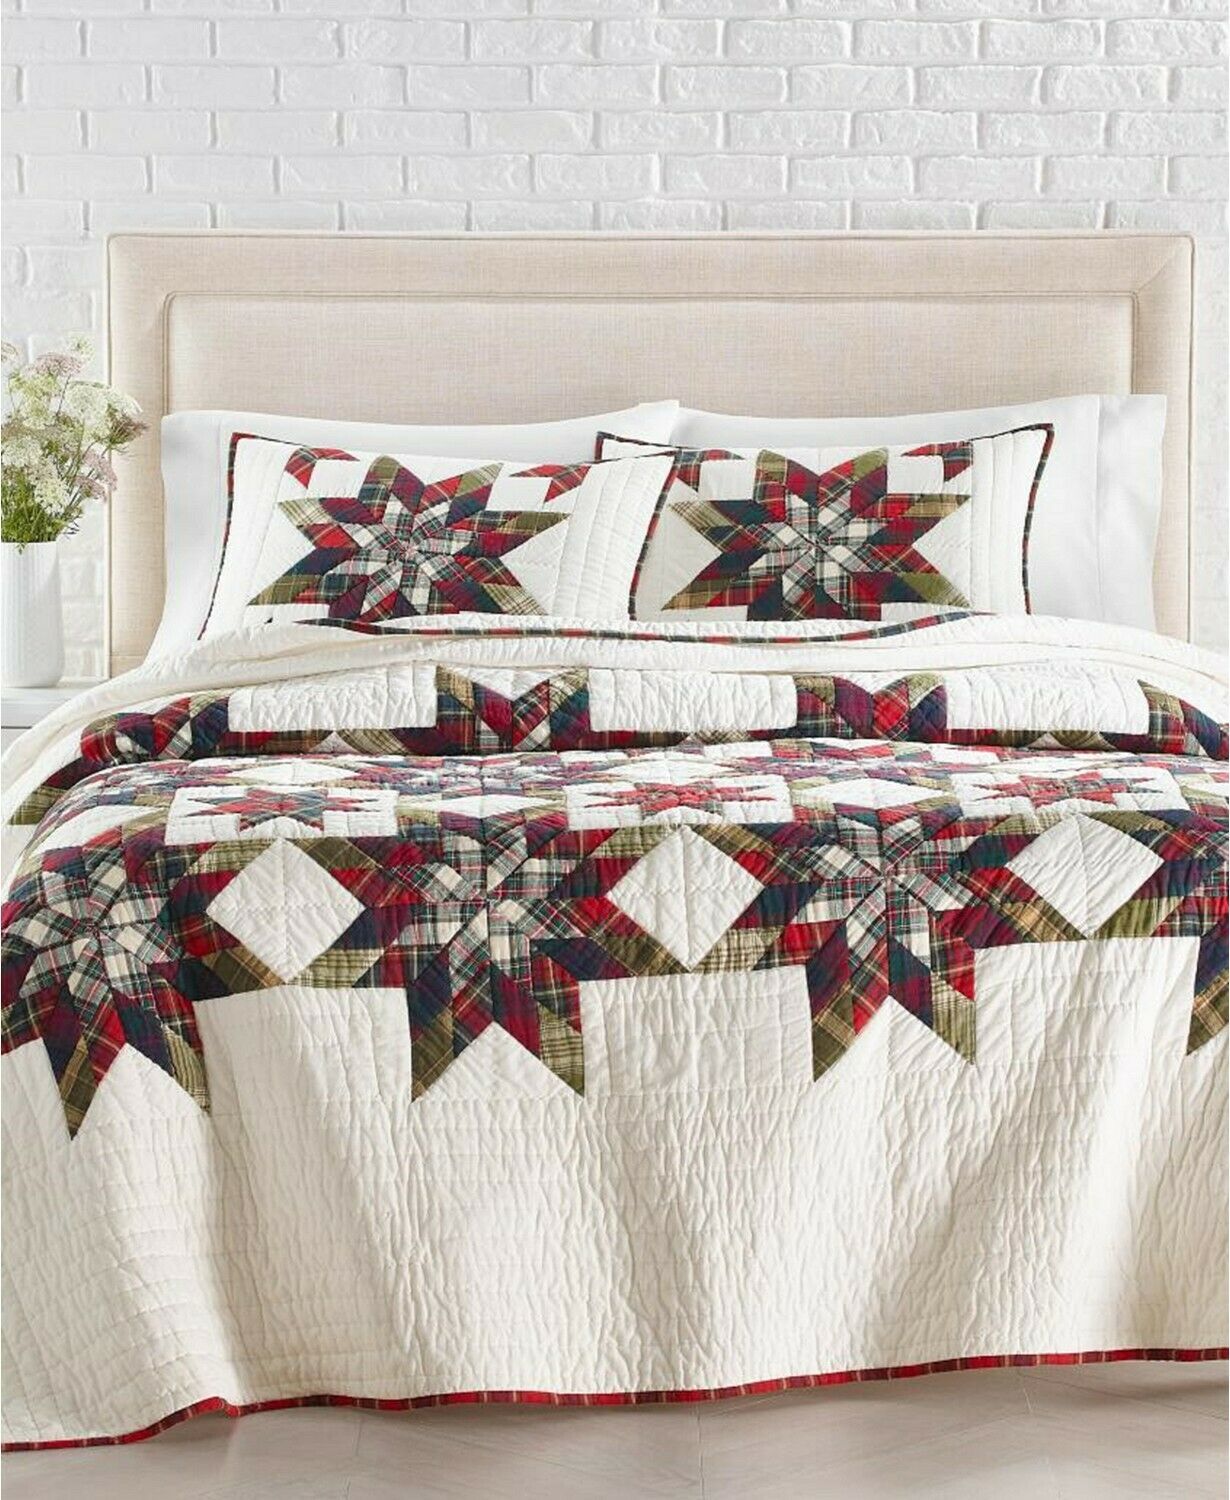 Primary image for Martha Stewart Collection Star Plaid Patchwork Artisan Twin Quilt $460